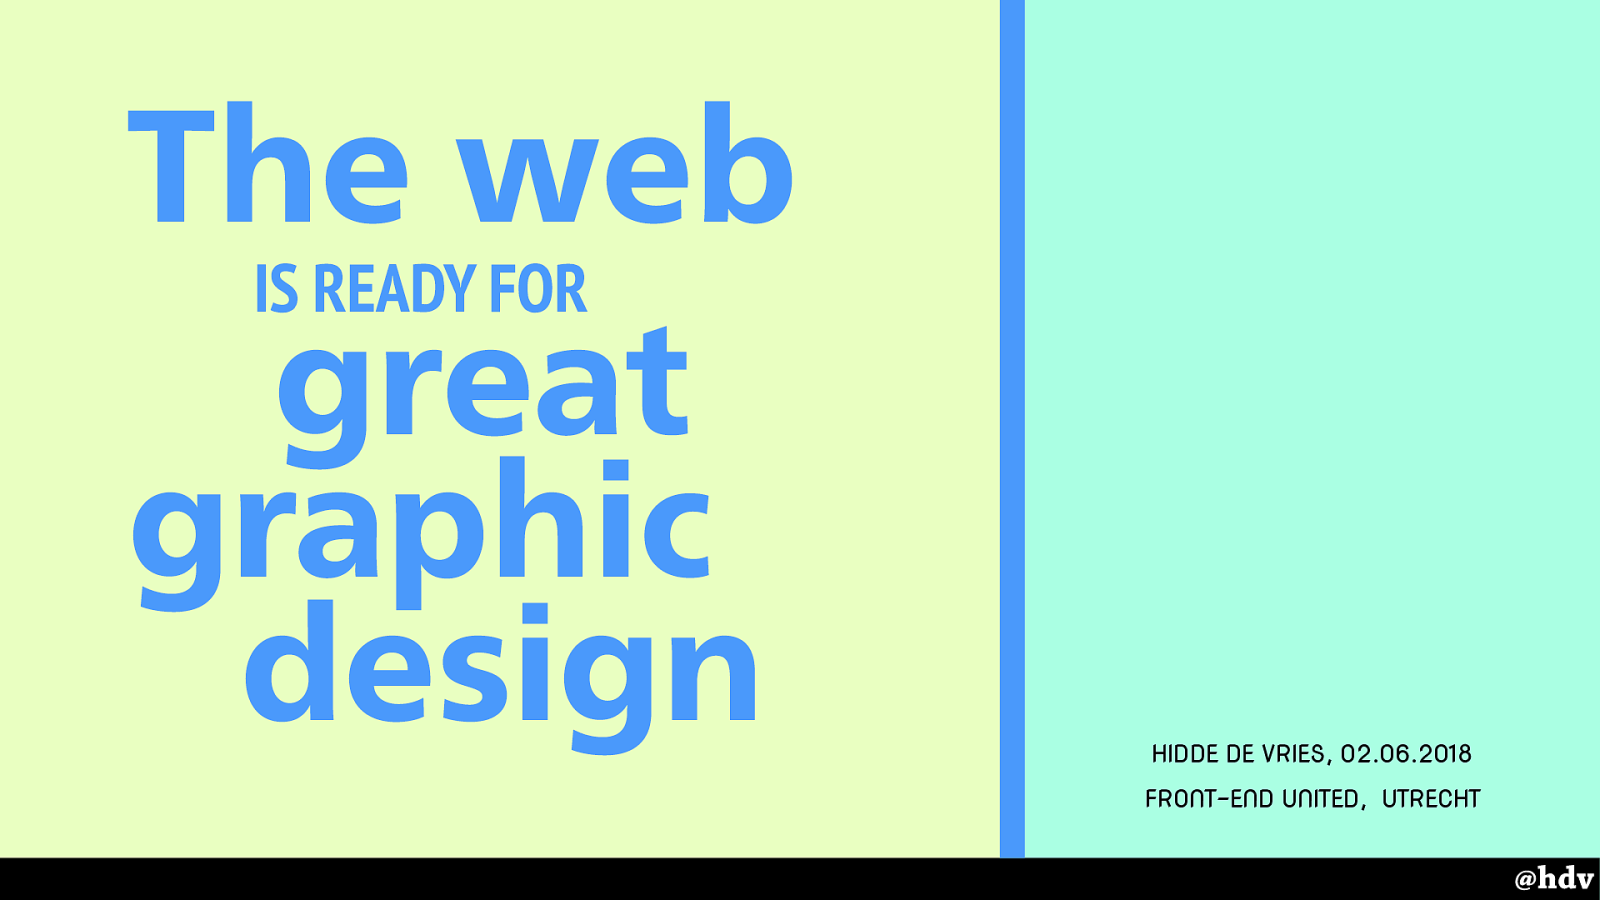 The web is ready for great graphic design